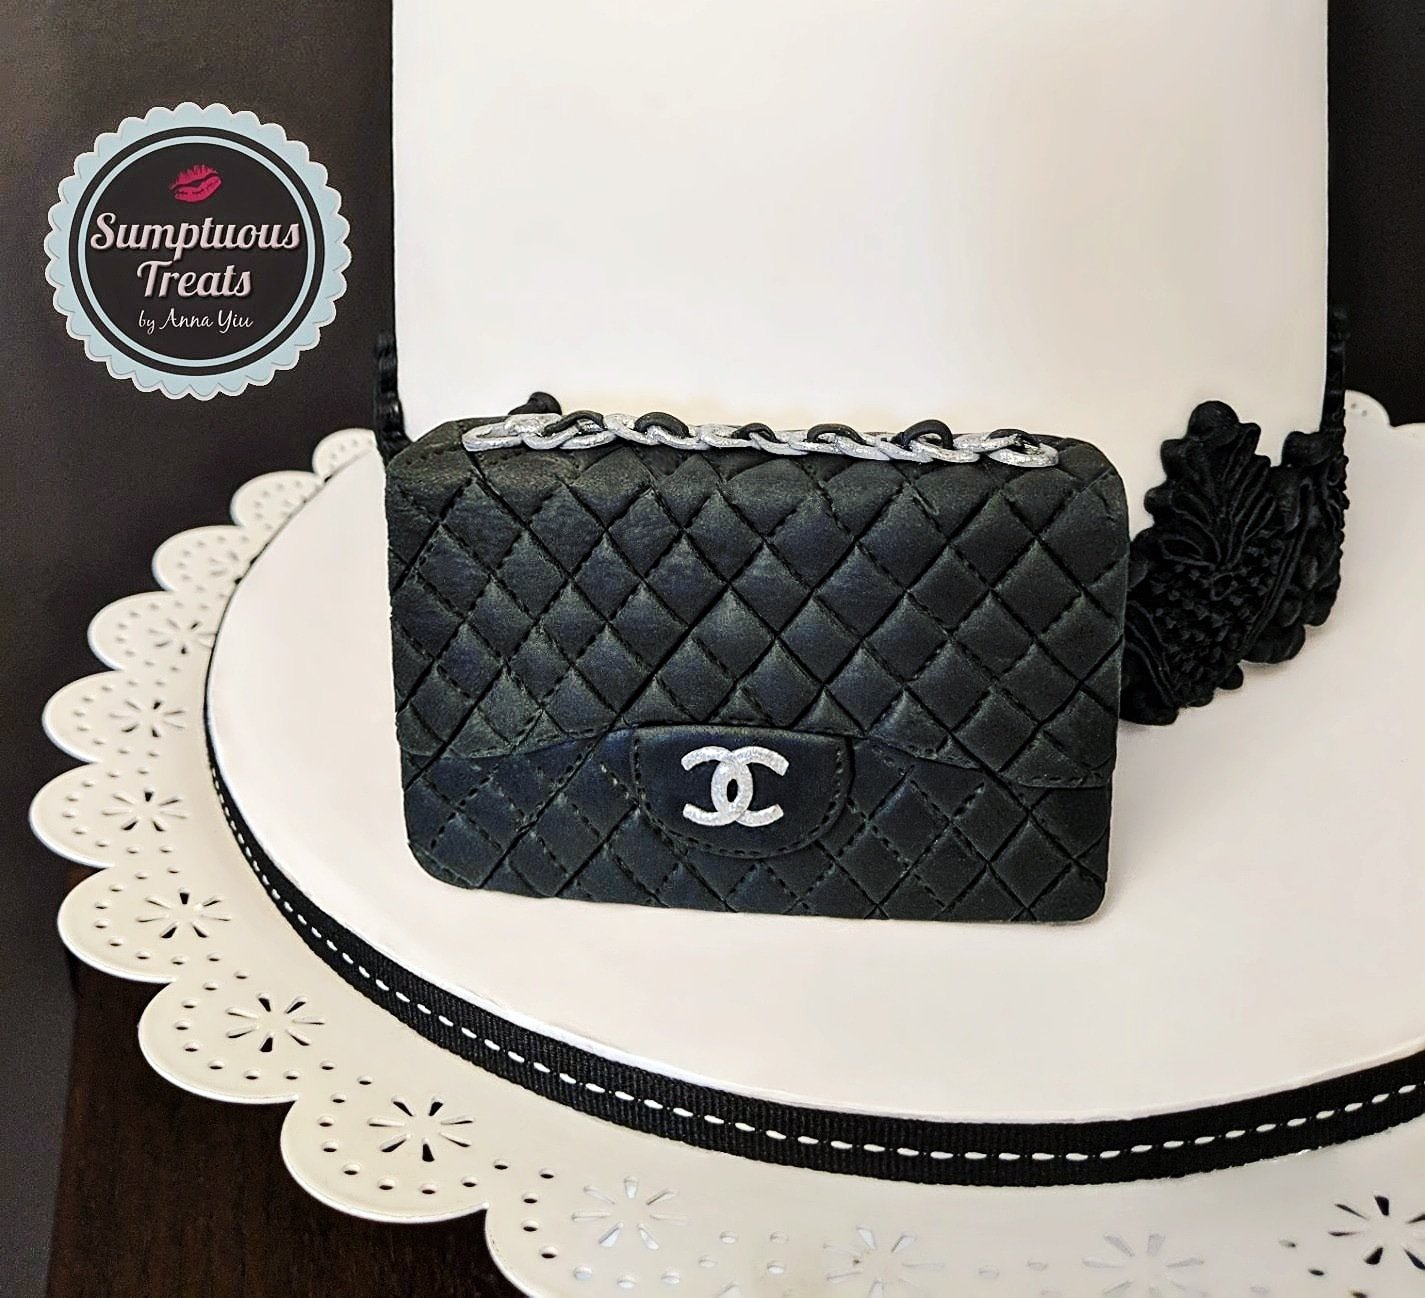 Chanel fondant cake toppers - Decorated Cake by Danielle - CakesDecor